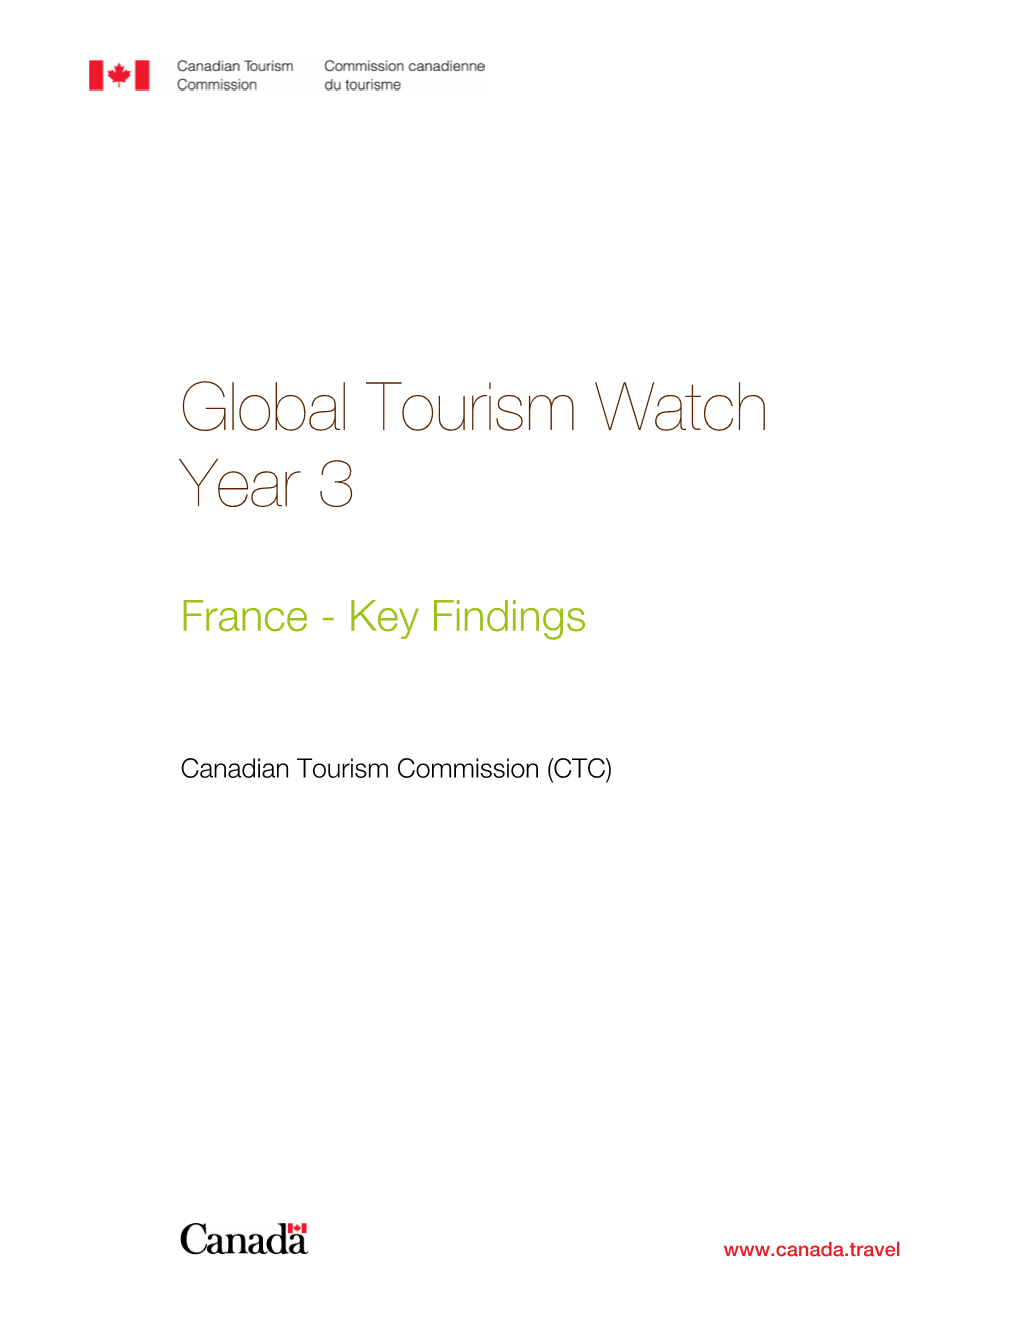 Global Tourism Watch Year 3